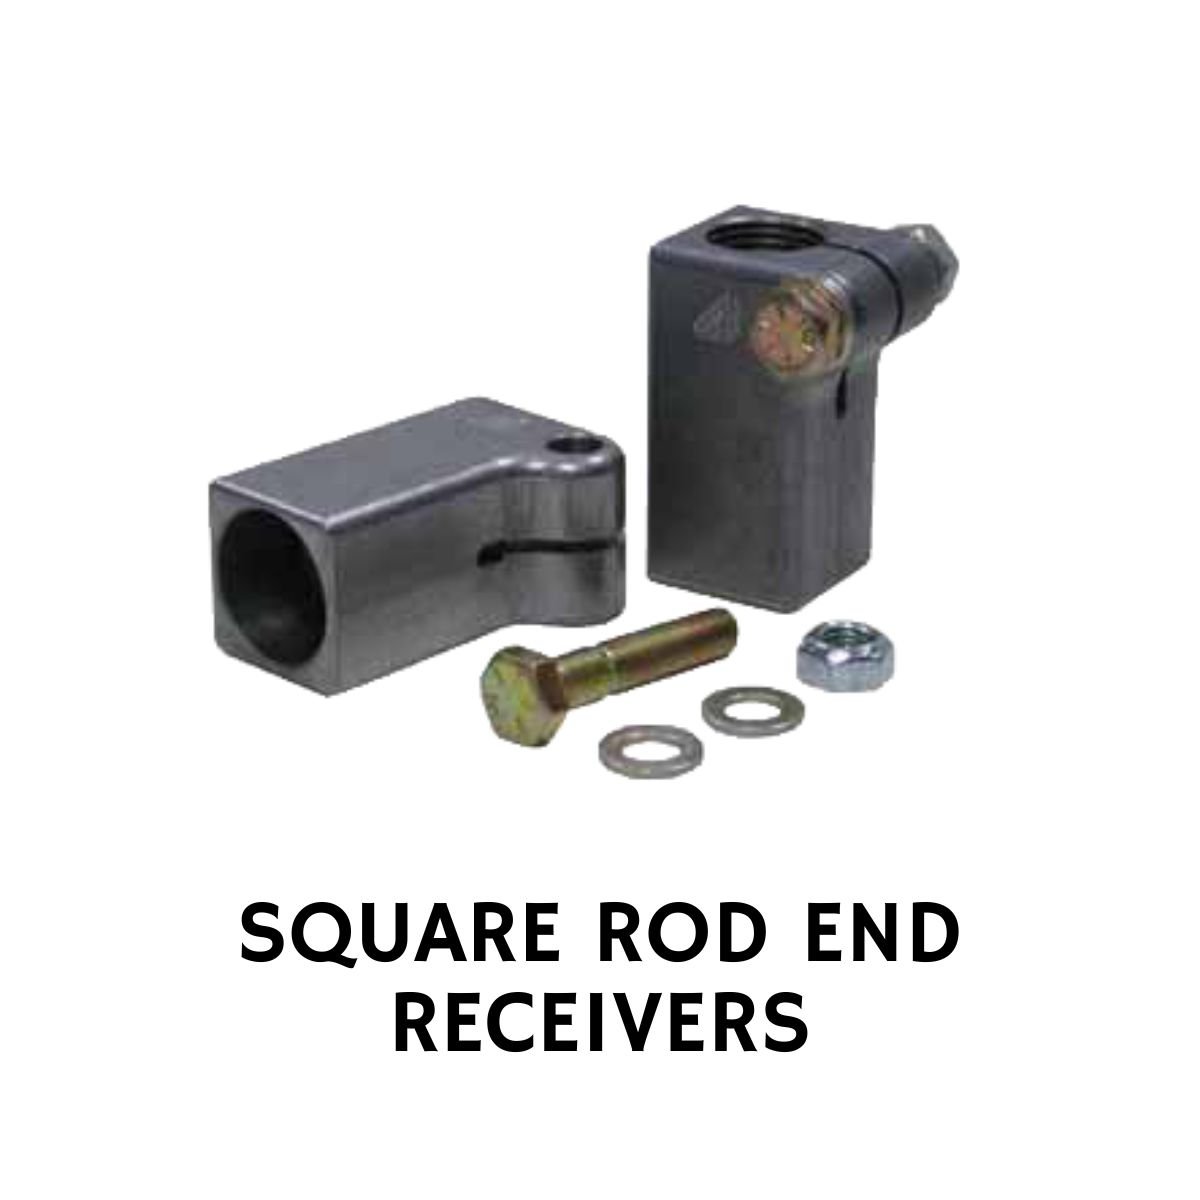 SUARE ROD END RECEIVERS